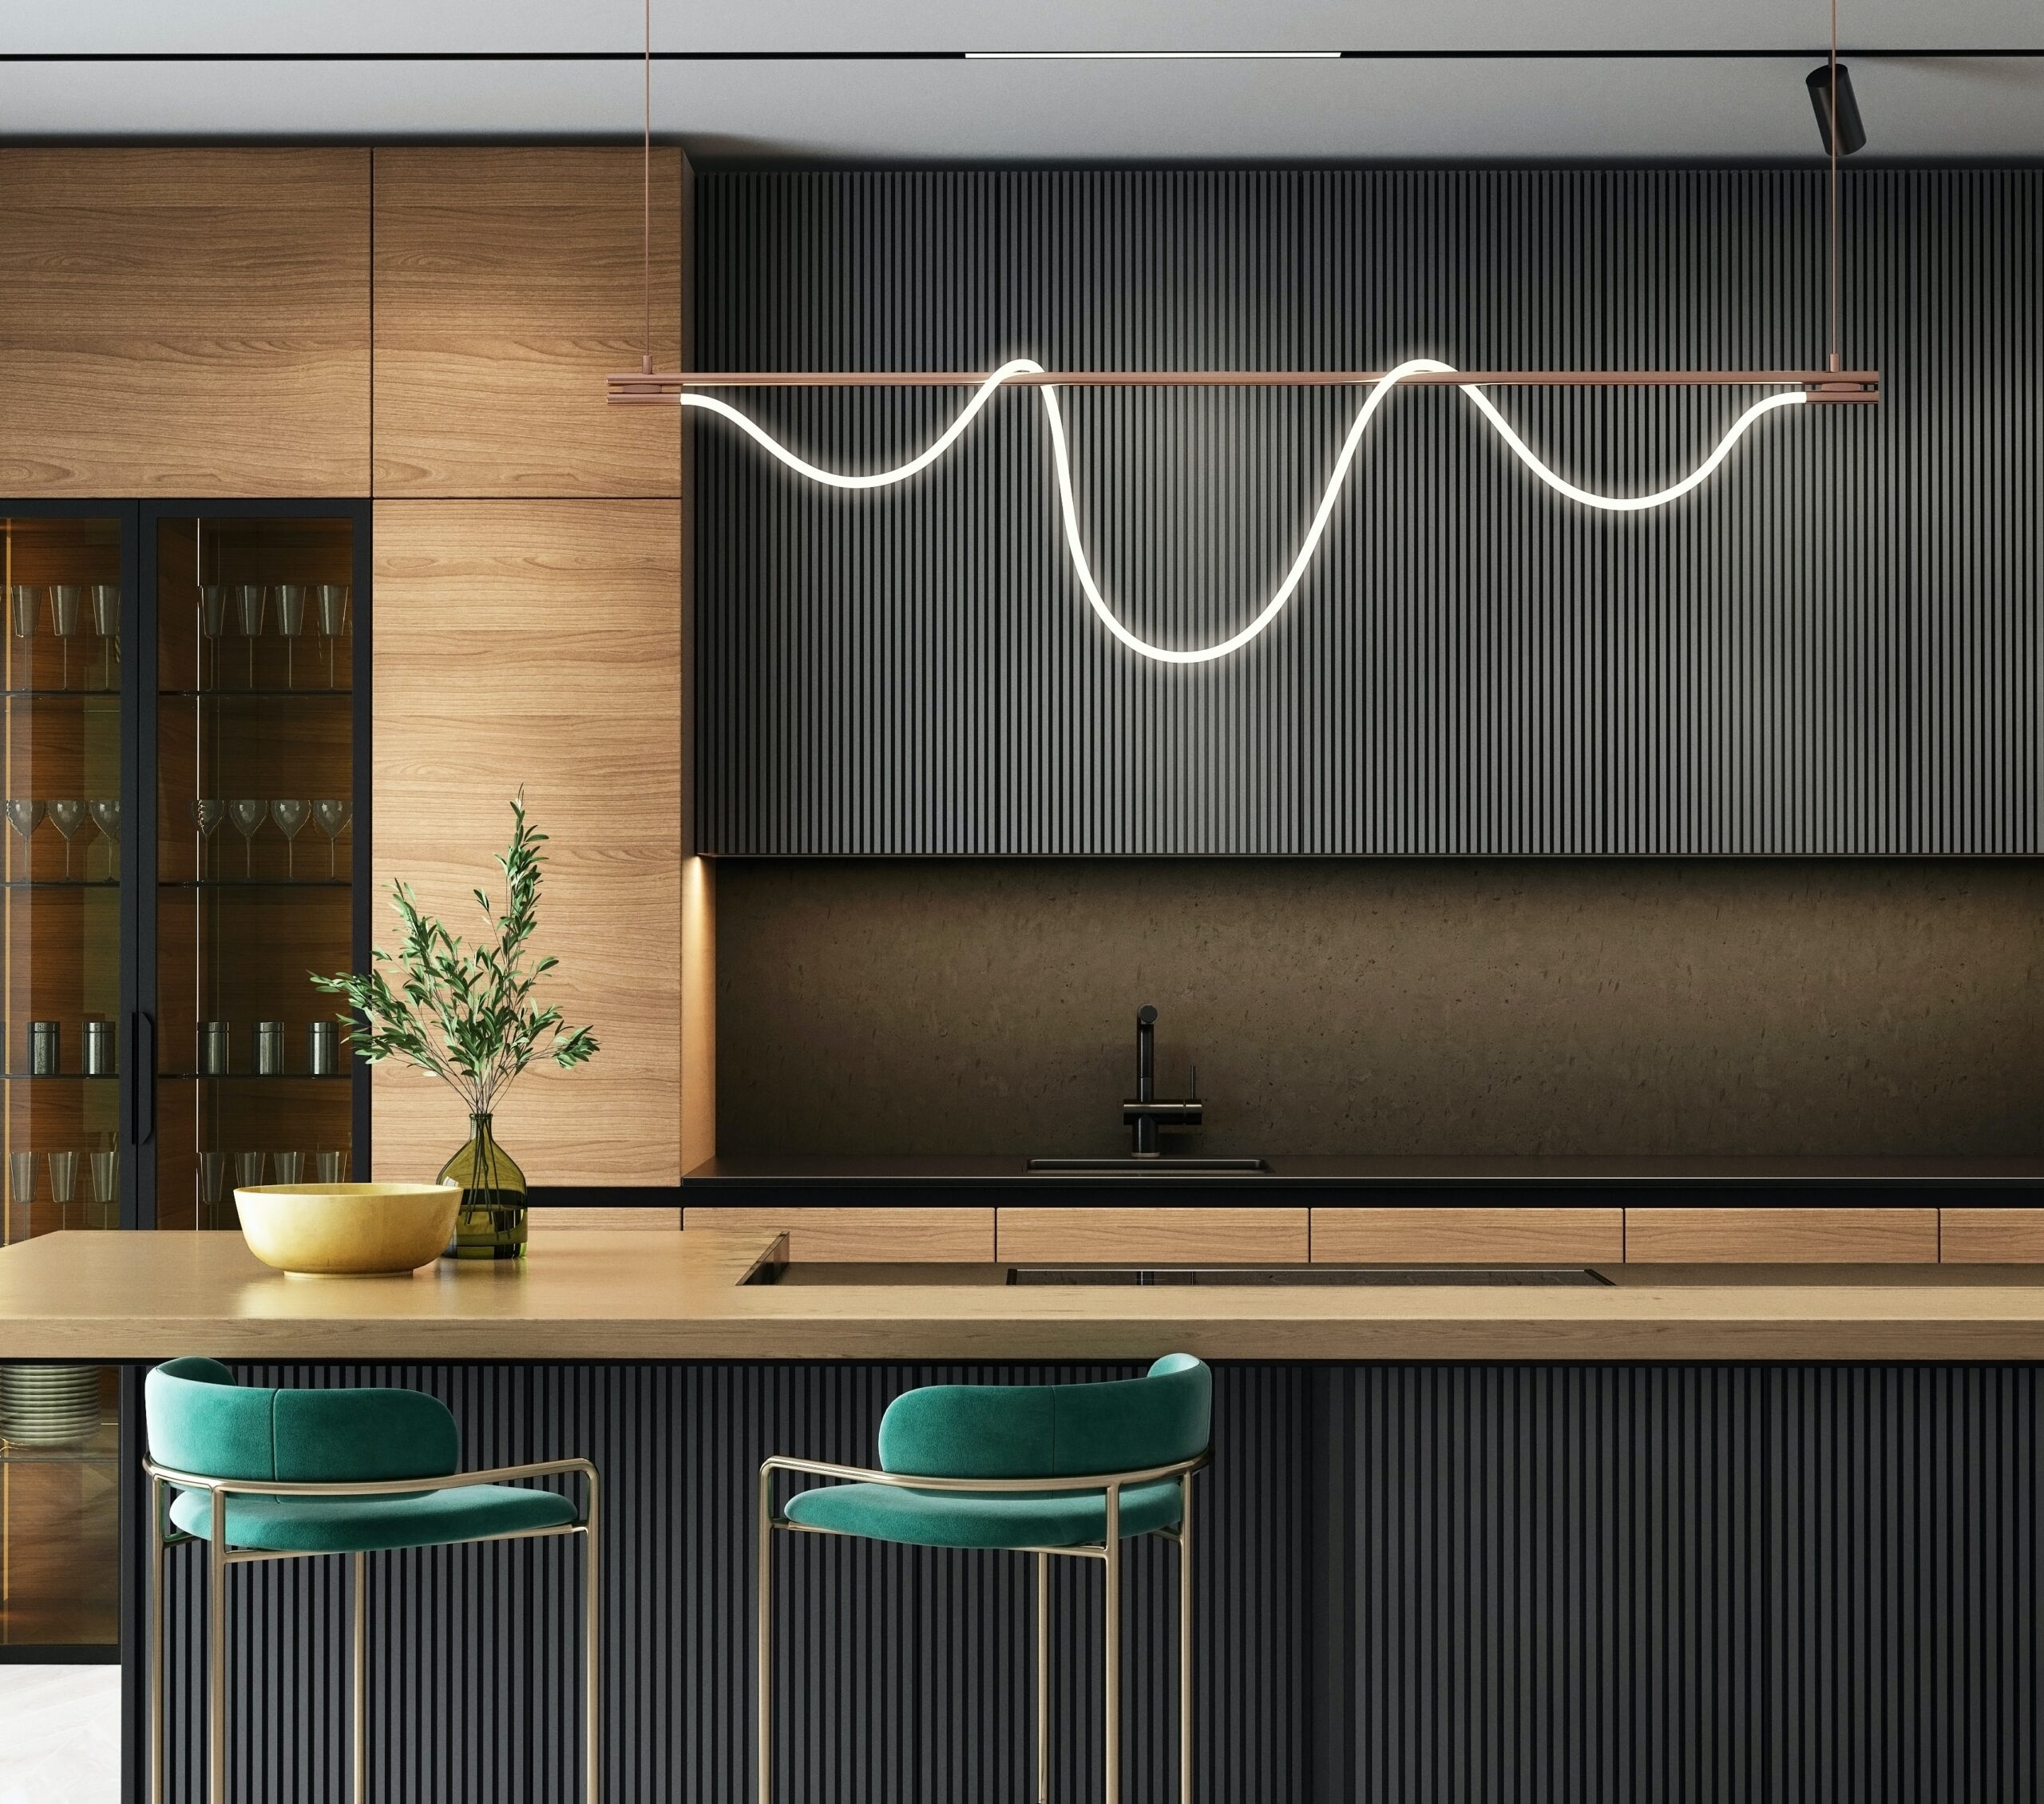 11 Kitchen Design Trends You'll See Everywhere in 2023